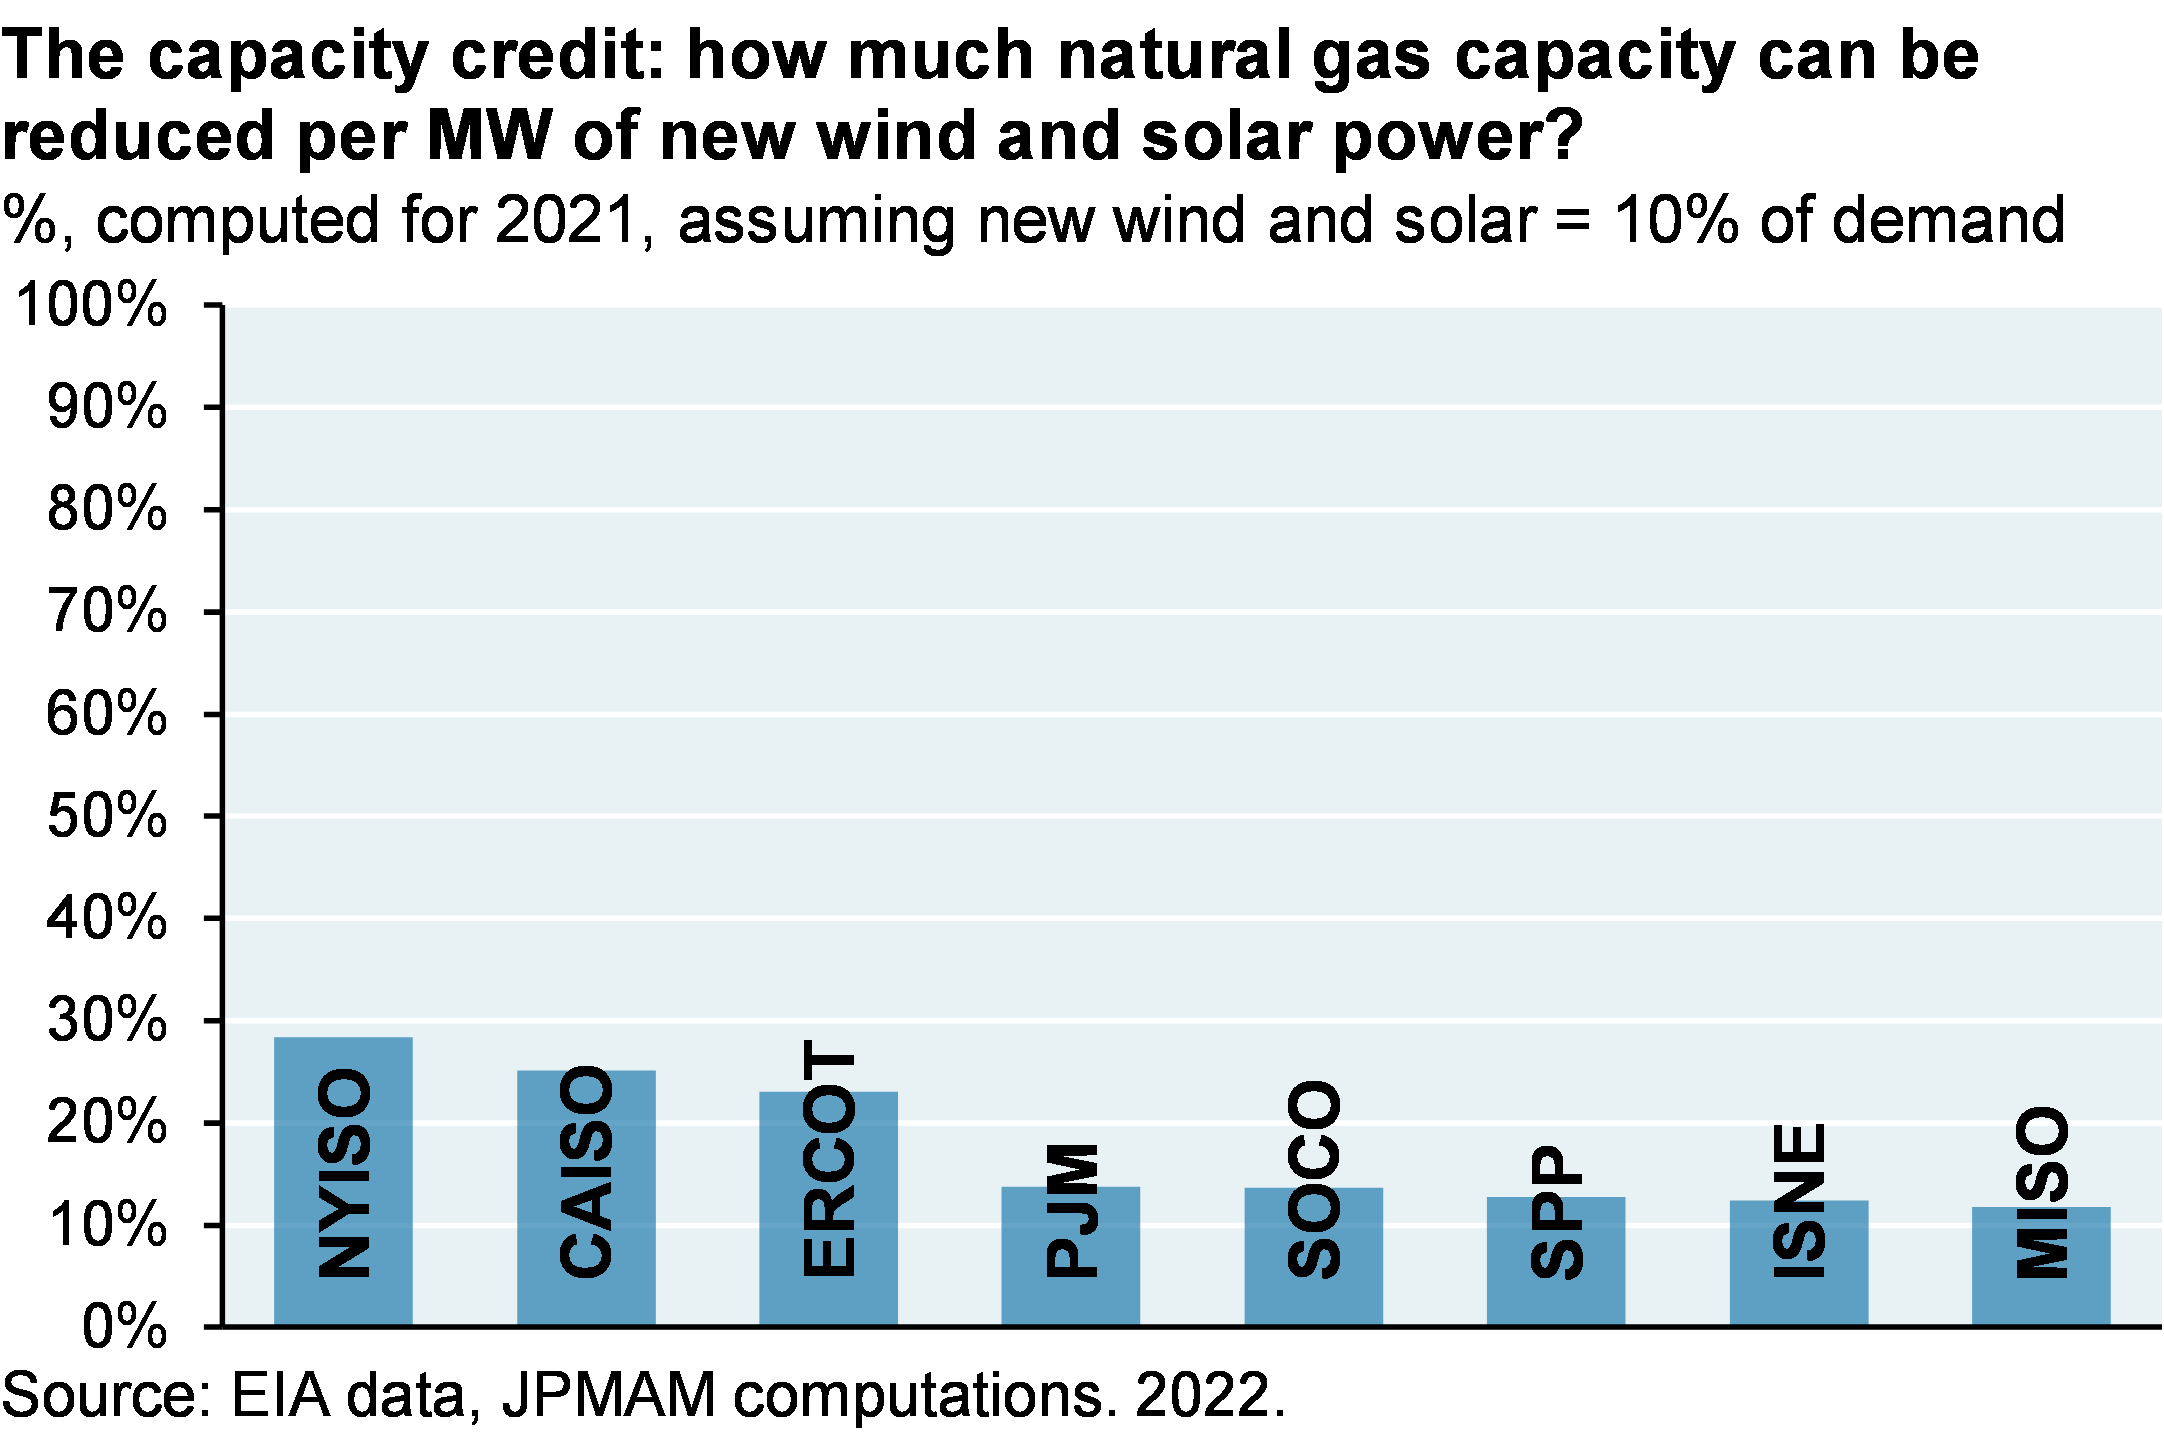 Bar chart shows the percentage of natural gas capacity that can be disconnected for each MW of new wind and solar power added (referred to as a “capacity credit”) for eight major US independent system operators (ISOs) / regional transmission organizations (RTOs). The capacity credits range from 10%-30%, with NYISO exhibiting the highest and MISO exhibiting the lowest capacity credits.